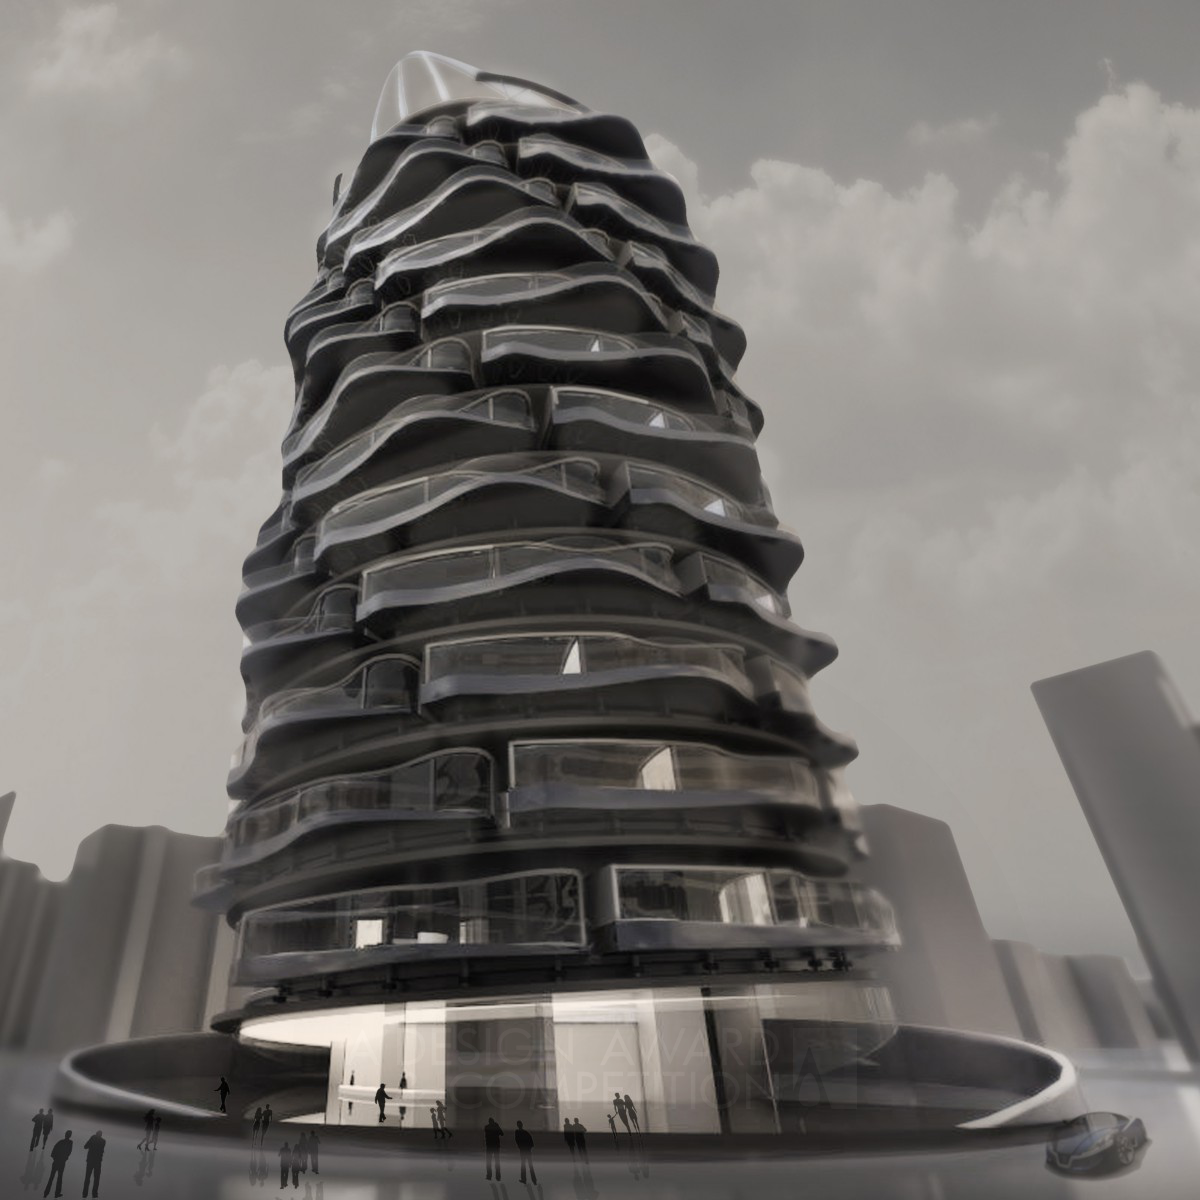 Turn to the Future Spiral Rotating Building by Yi-Chen (Shin) Kuo